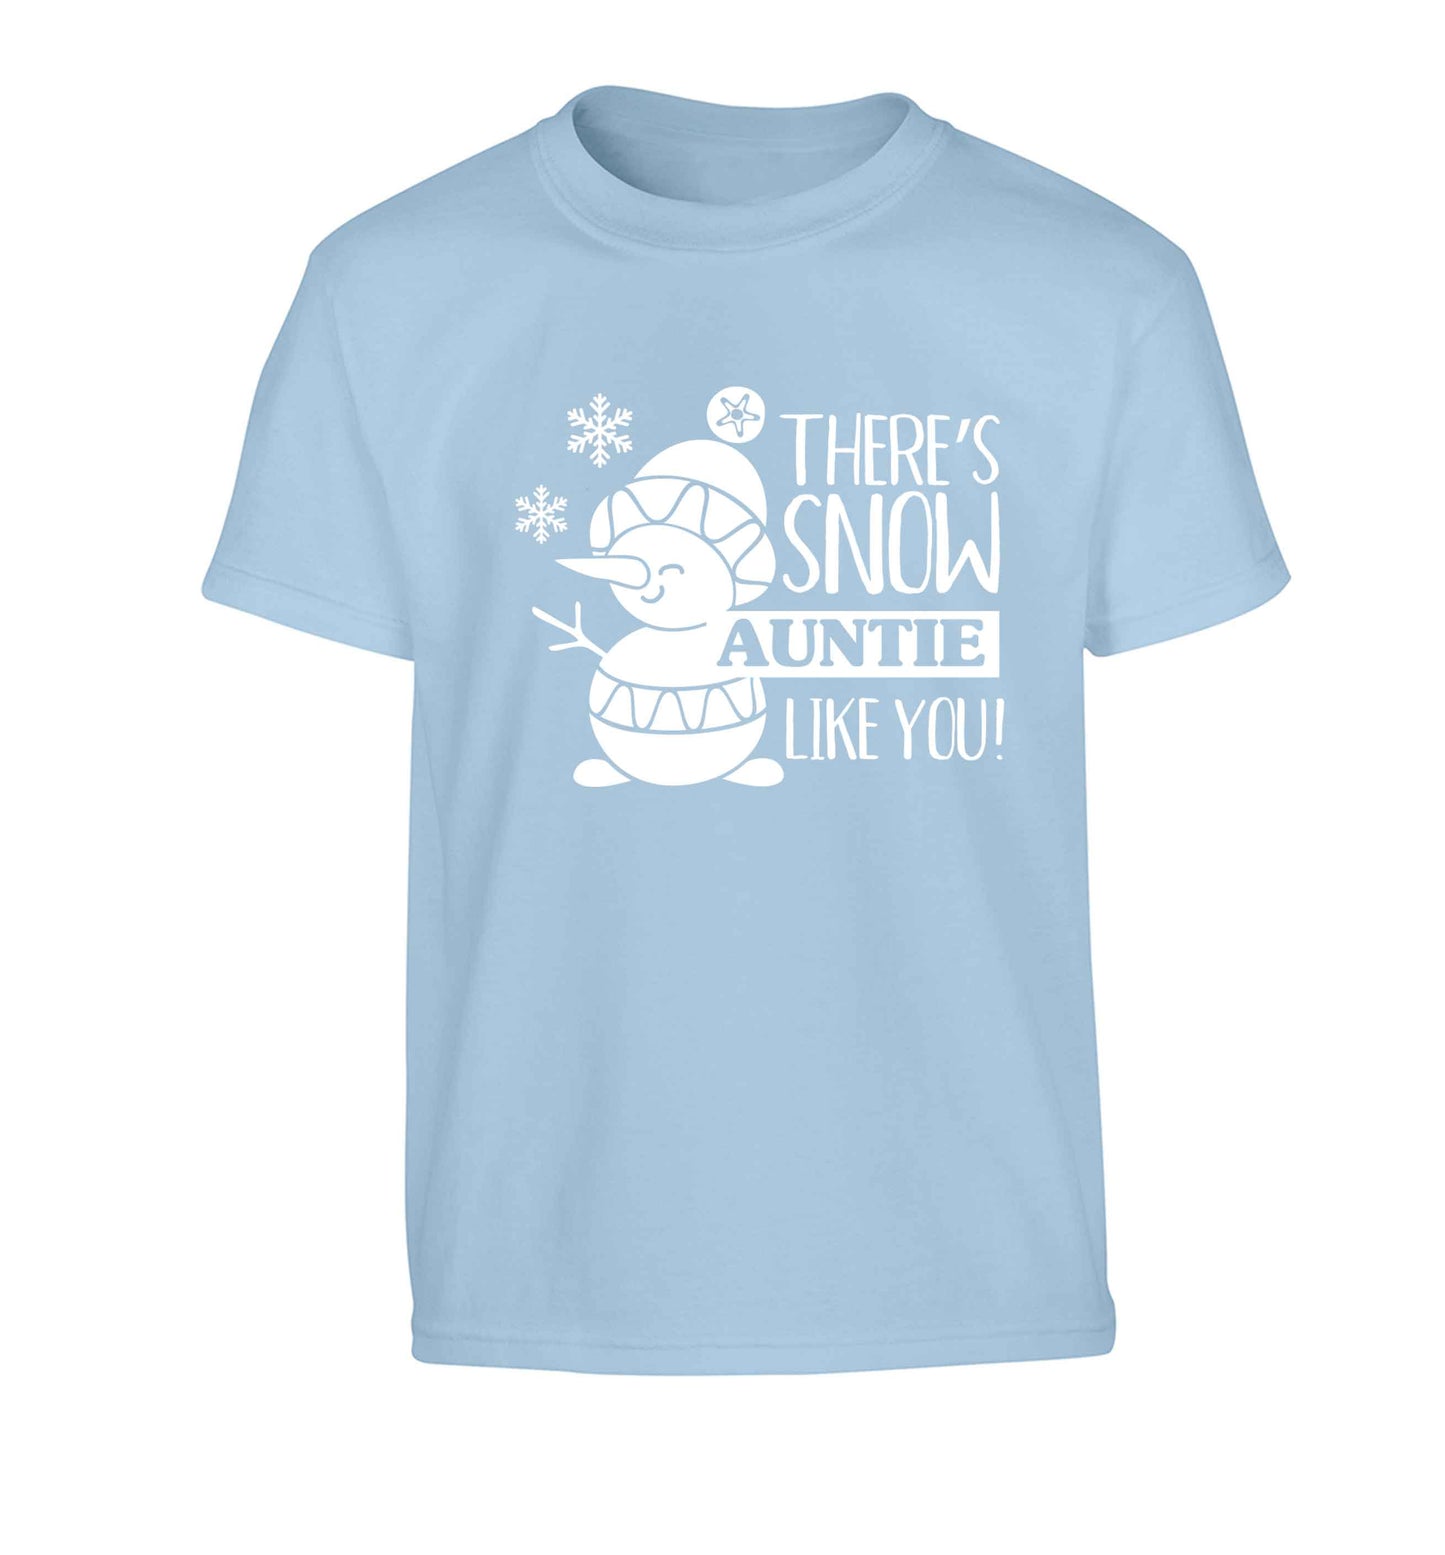 There's snow auntie like you Children's light blue Tshirt 12-13 Years